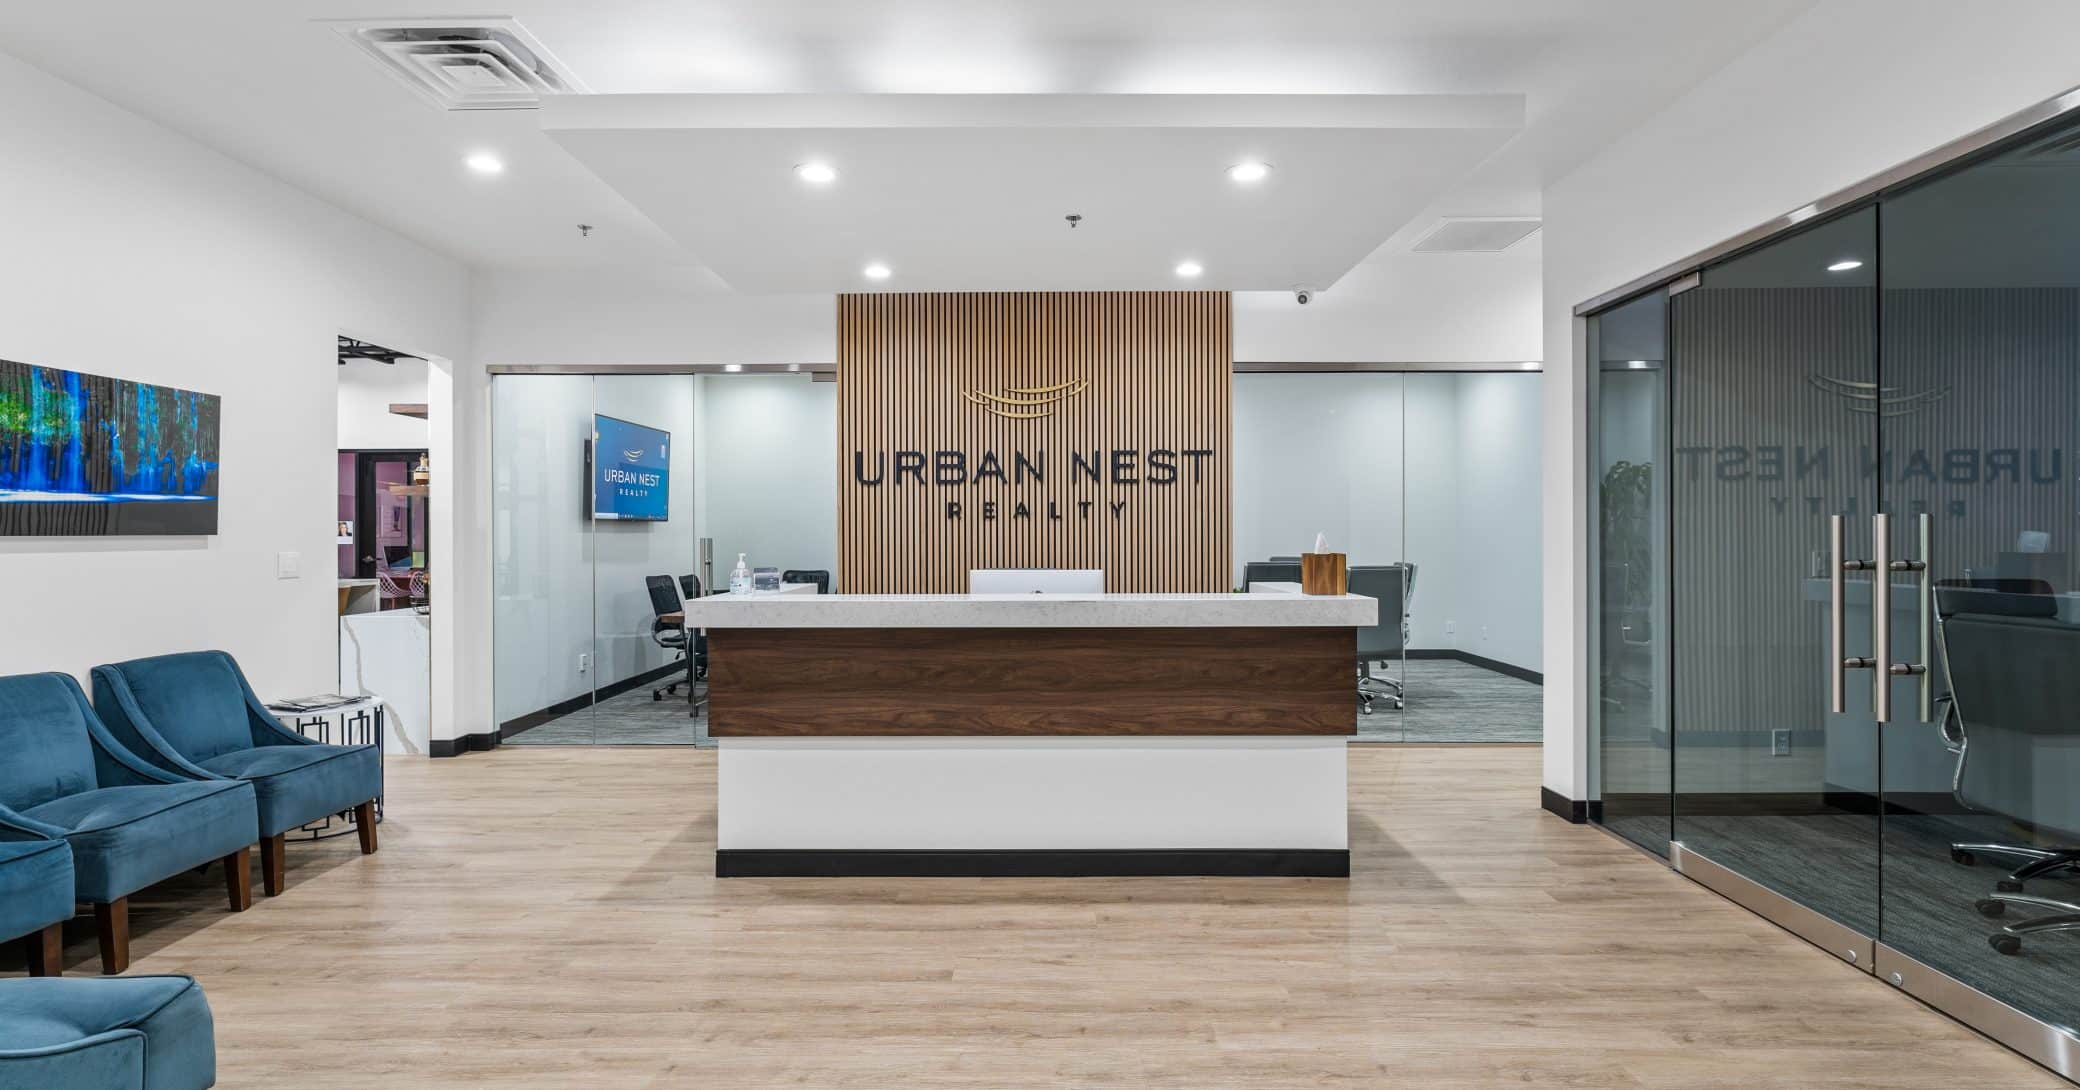 Kalb Industries completed an office tenant improvement for Urban Nest Realty.